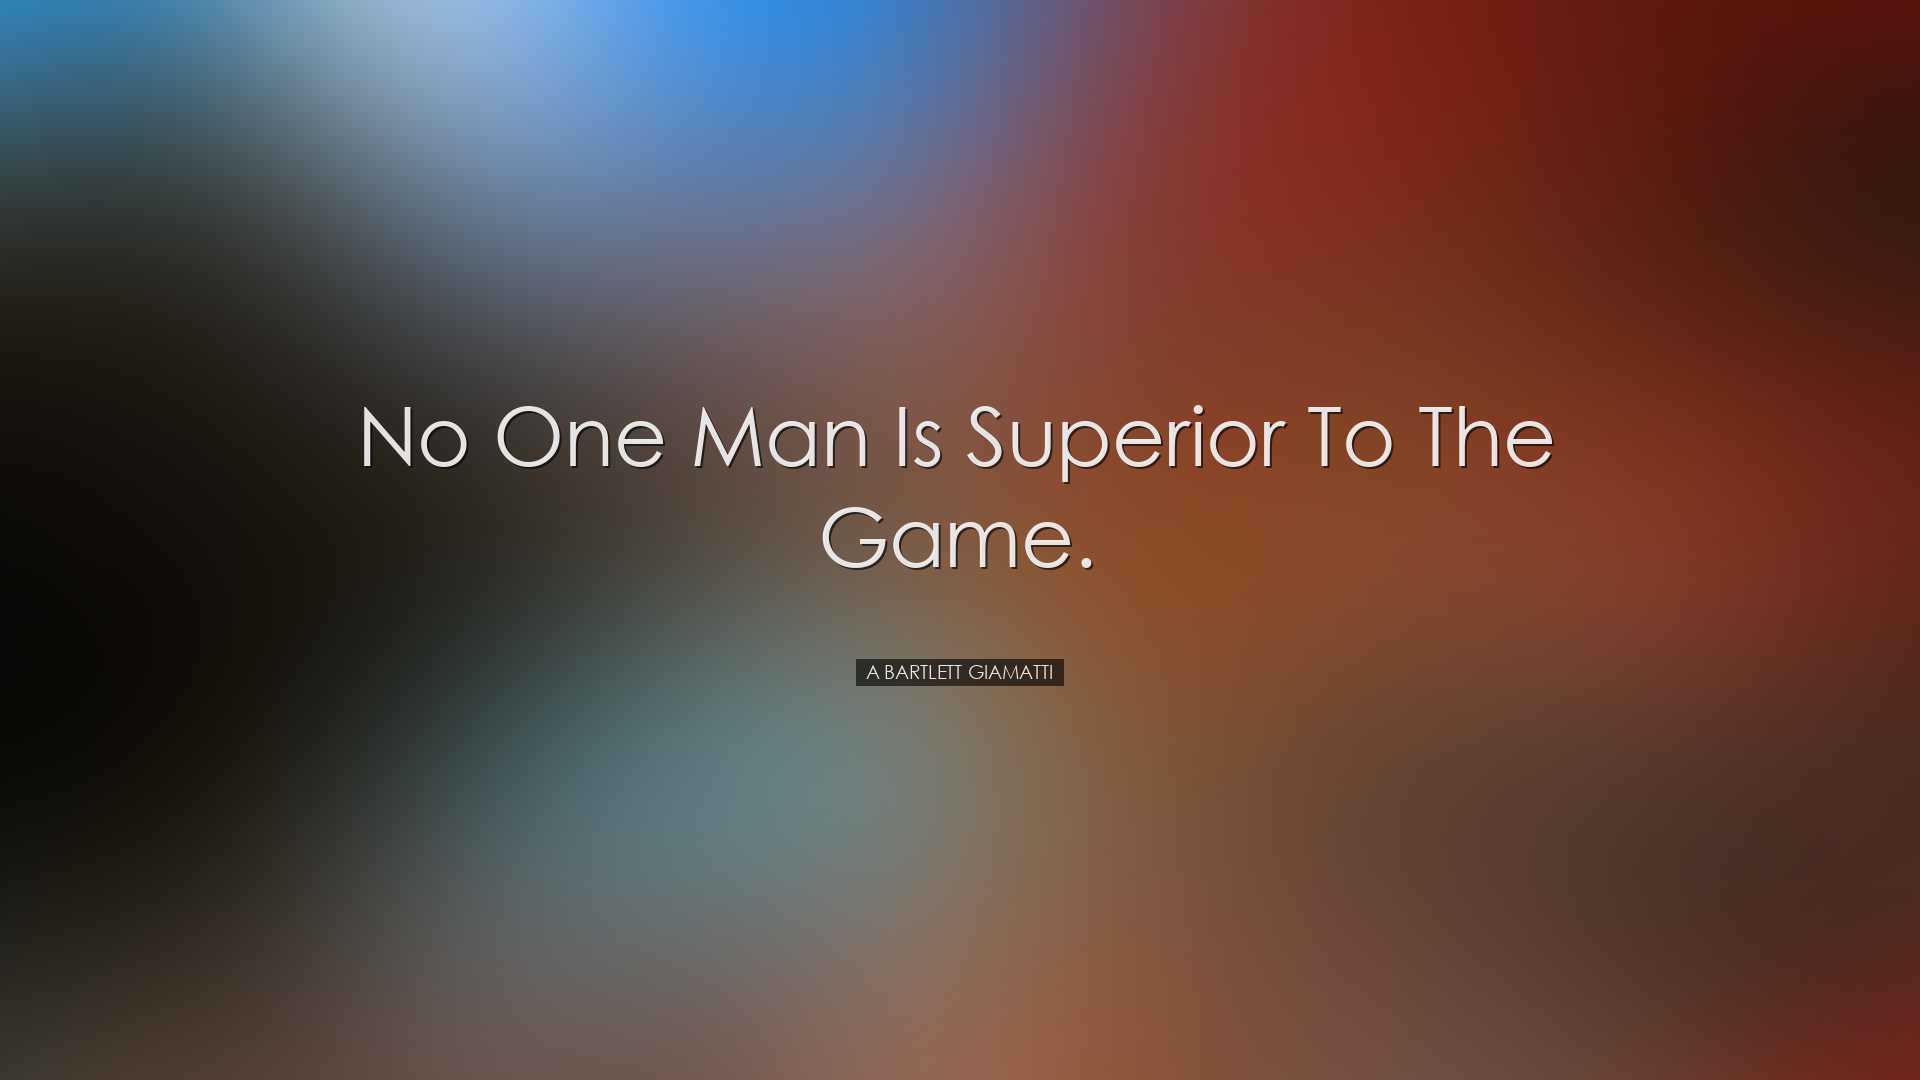 No one man is superior to the game. - A Bartlett Giamatti